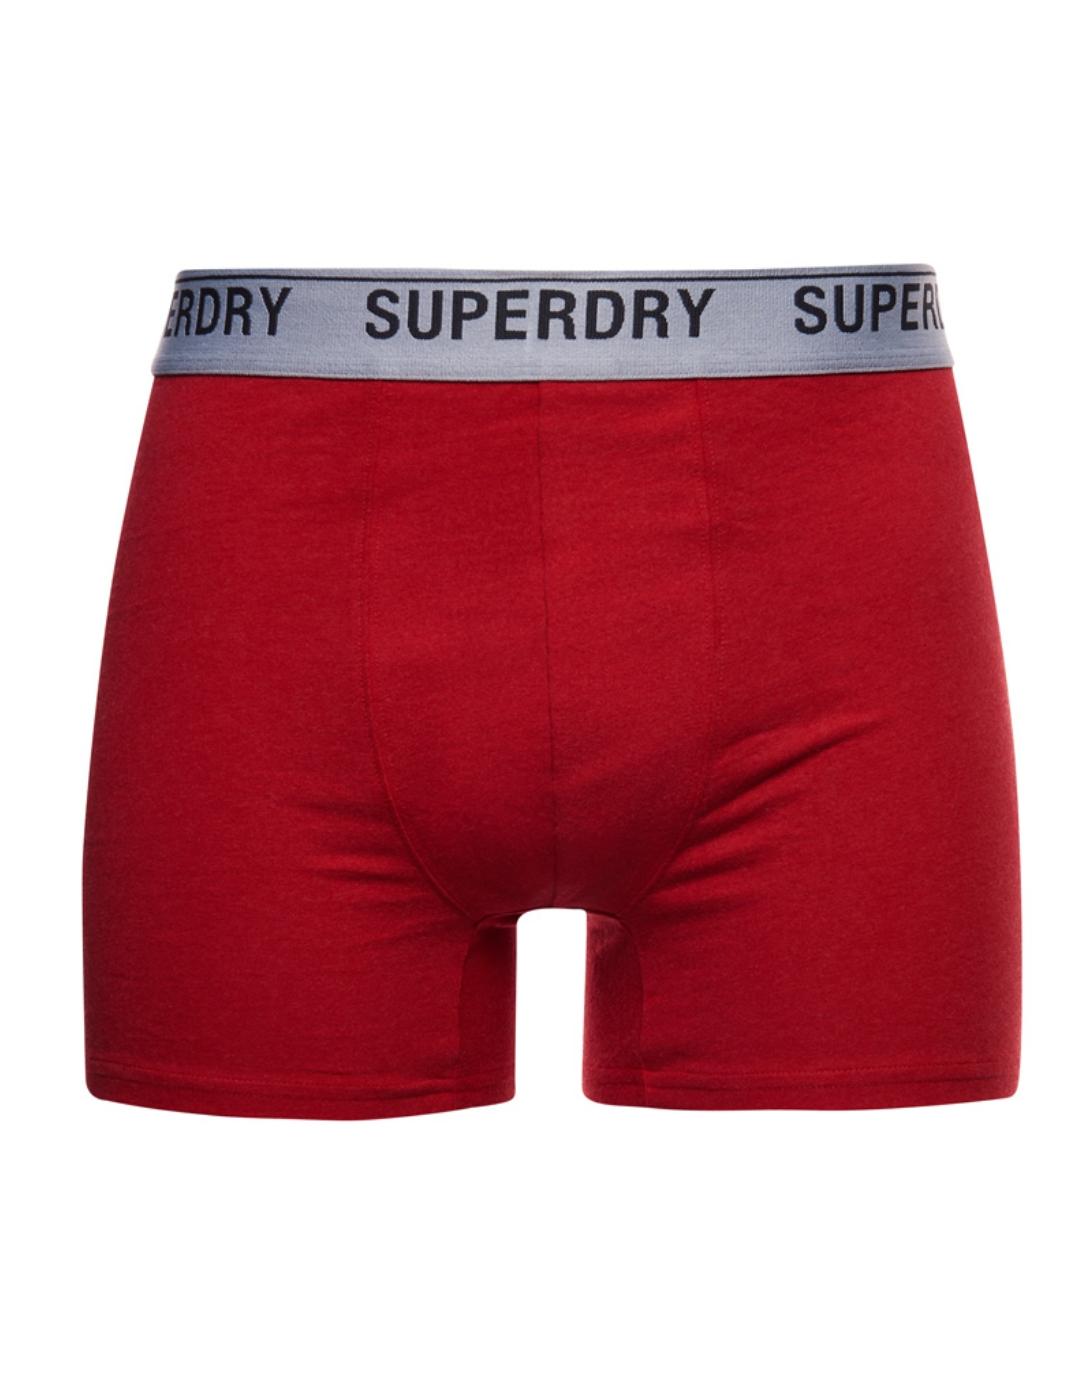 Intimo Superdry pack3 boxer Burgundy hombre-a